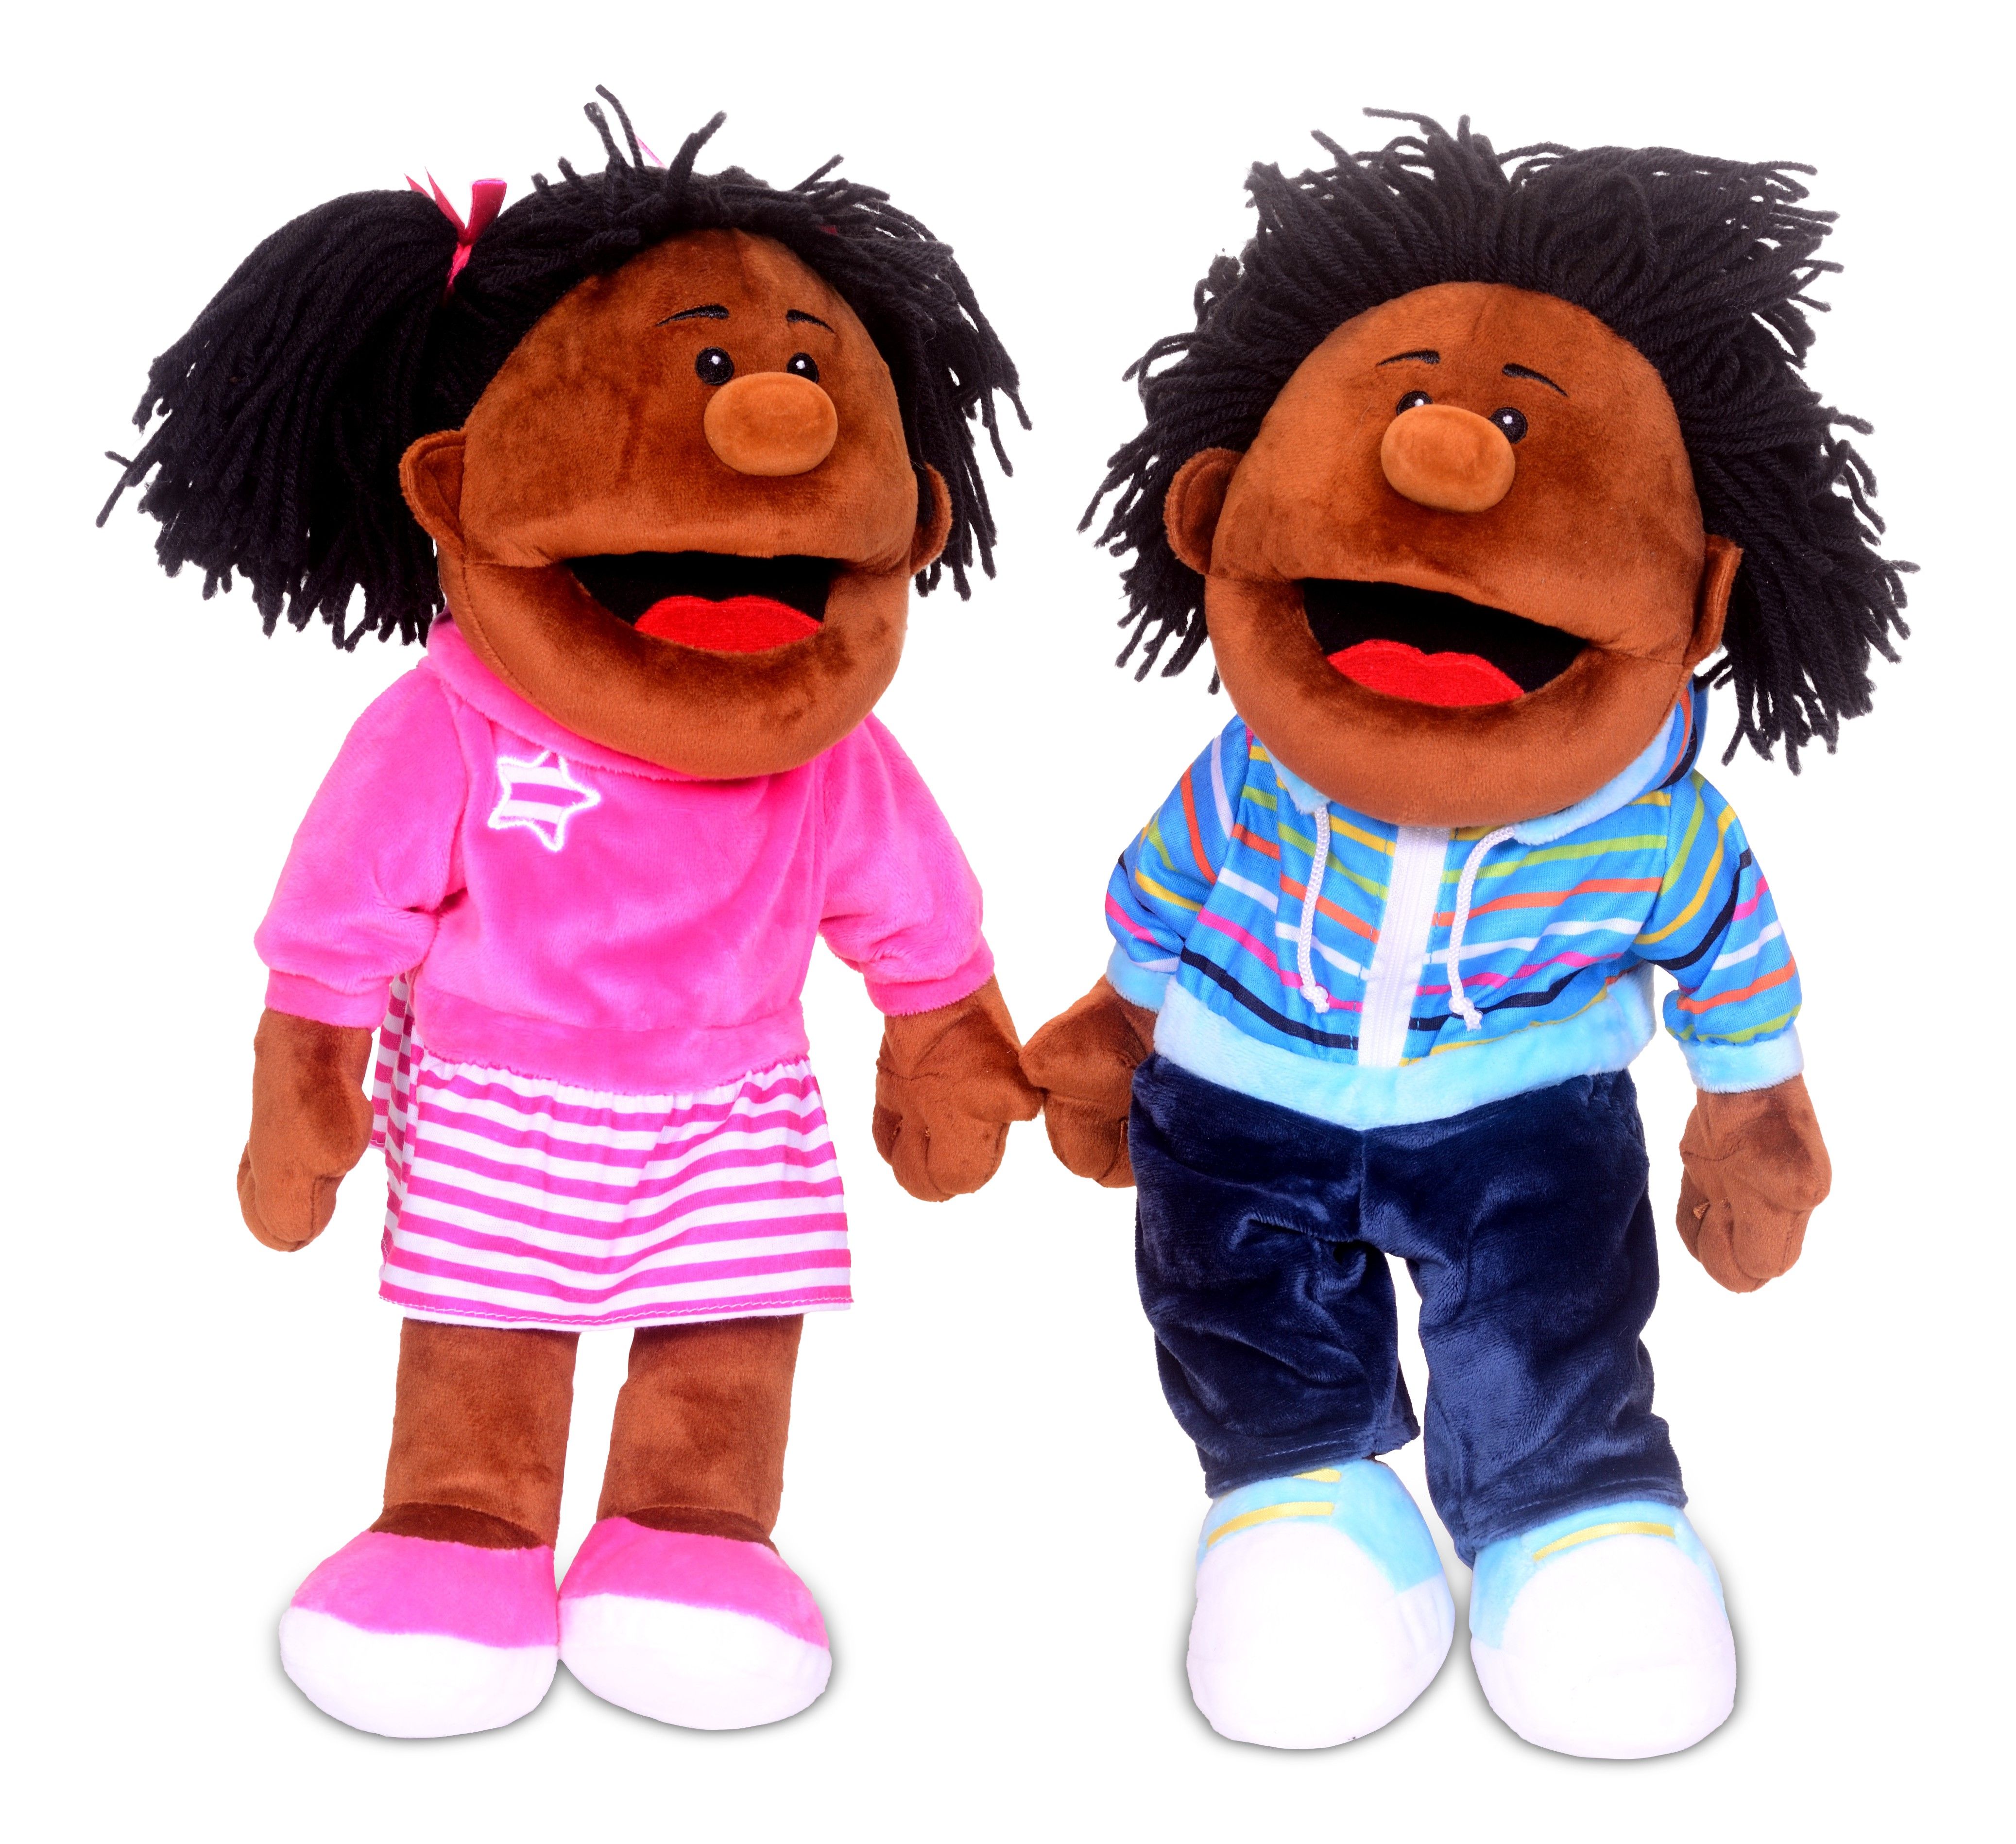 Black girl and boy hand puppets